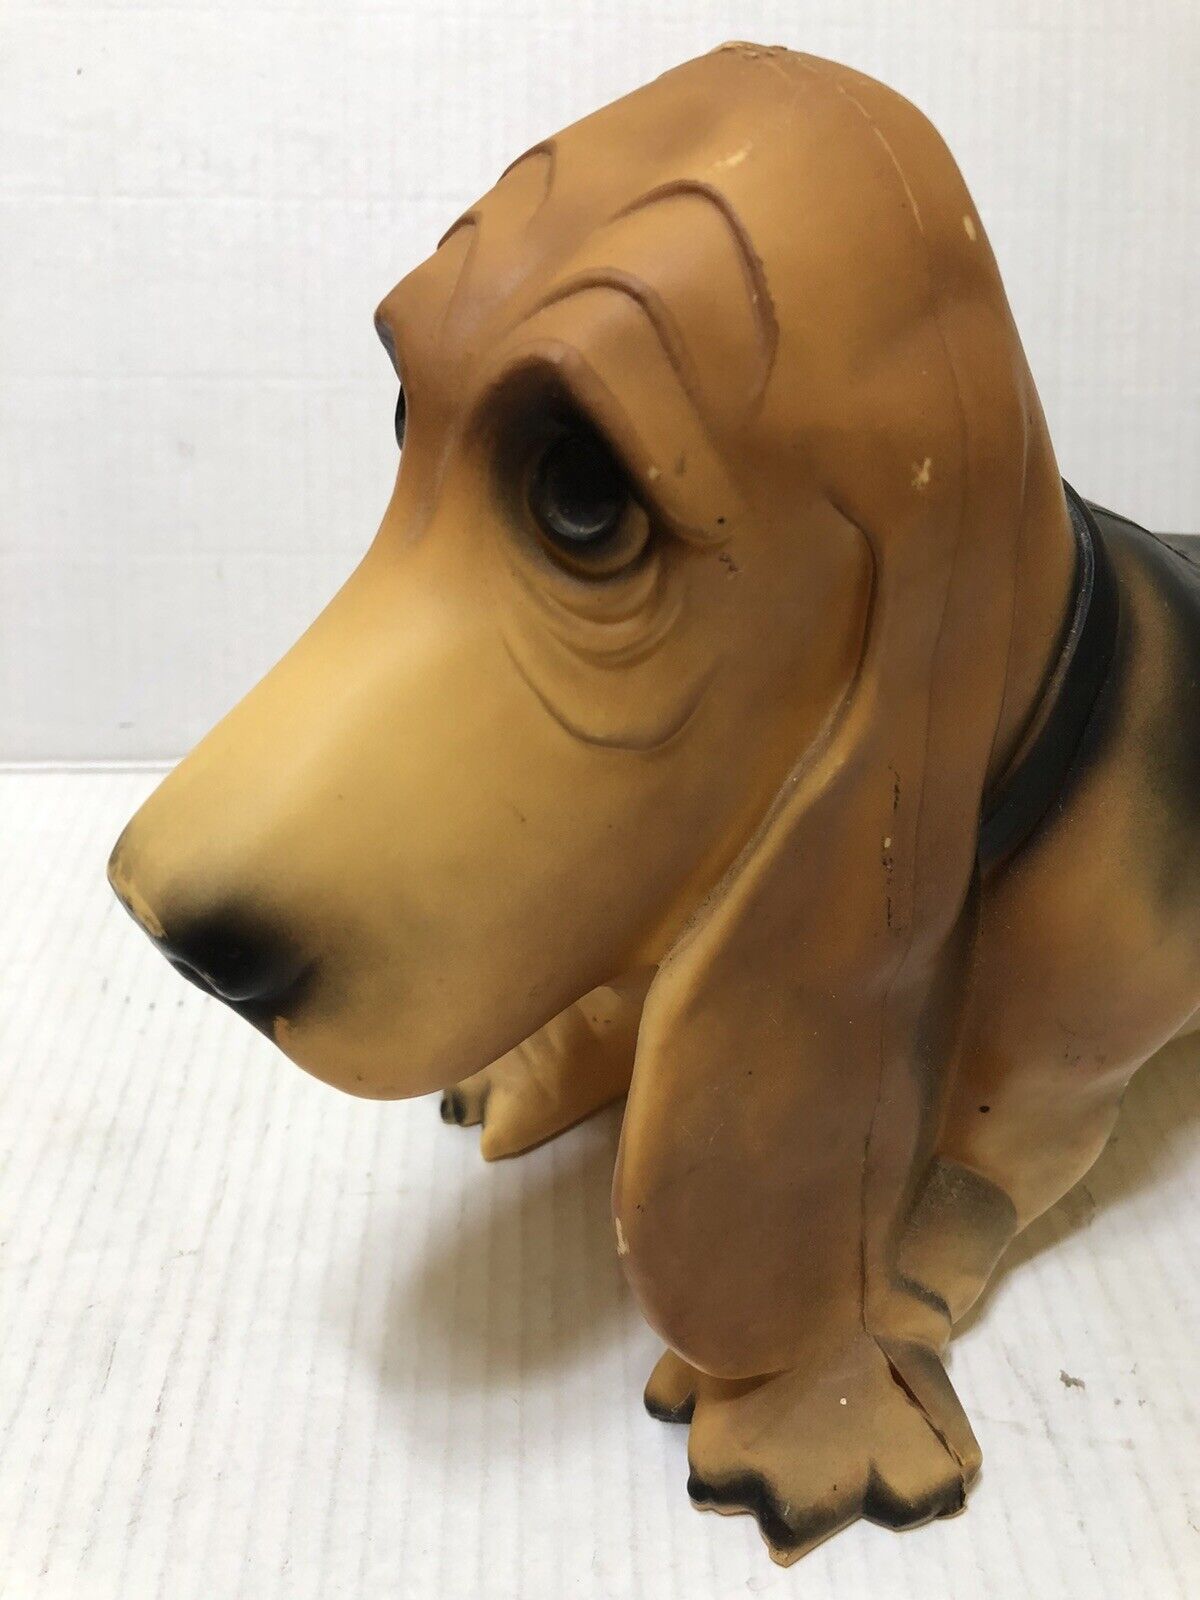 Vintage 1960s 15” BASSET HOUND Dog BLOW MOLD by Union Products